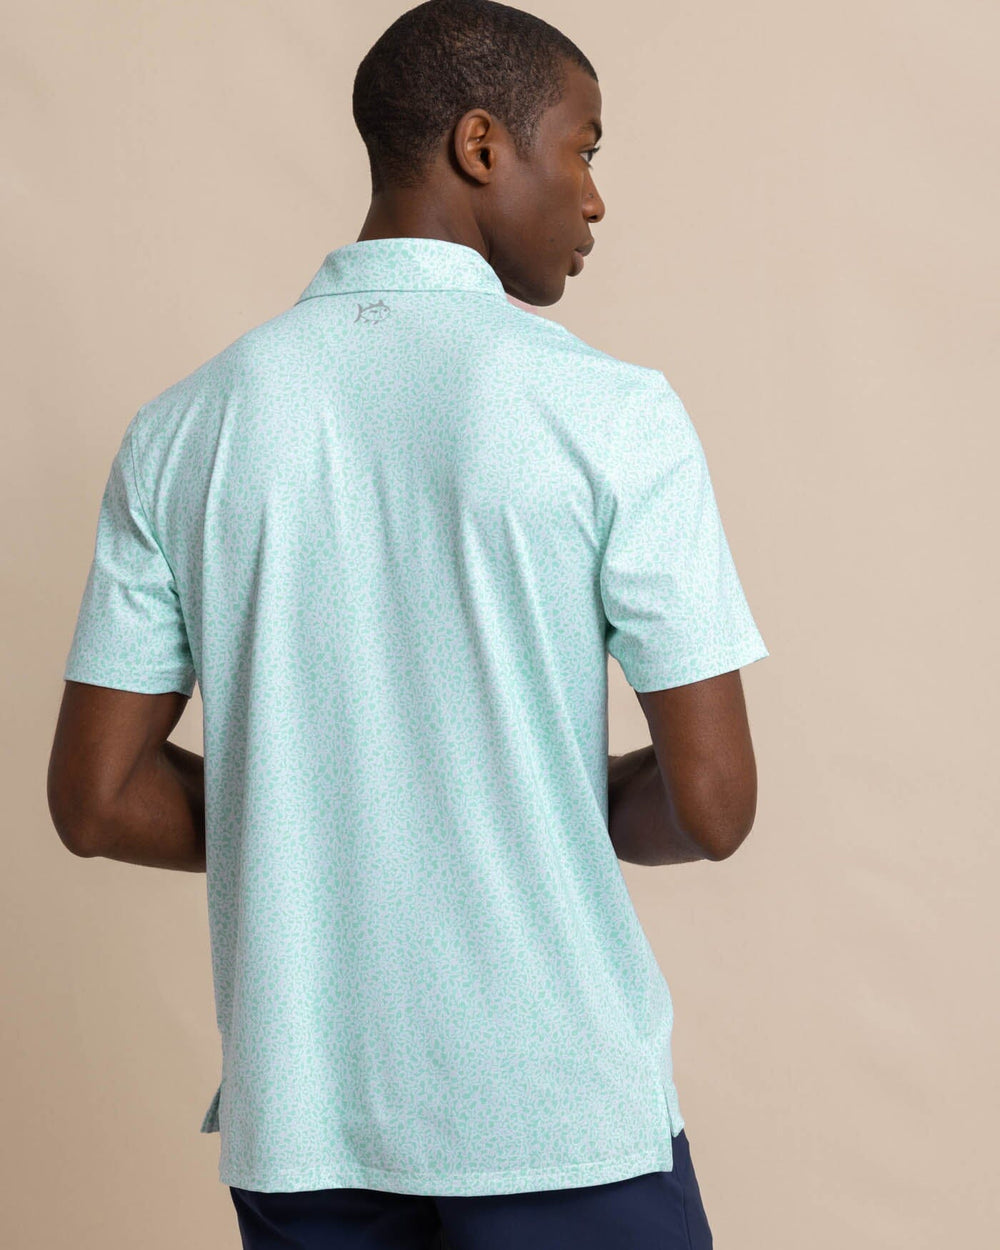 The back view of the Southern Tide Driver That Floral Feeling Printed Polo by Southern Tide - Wake Blue